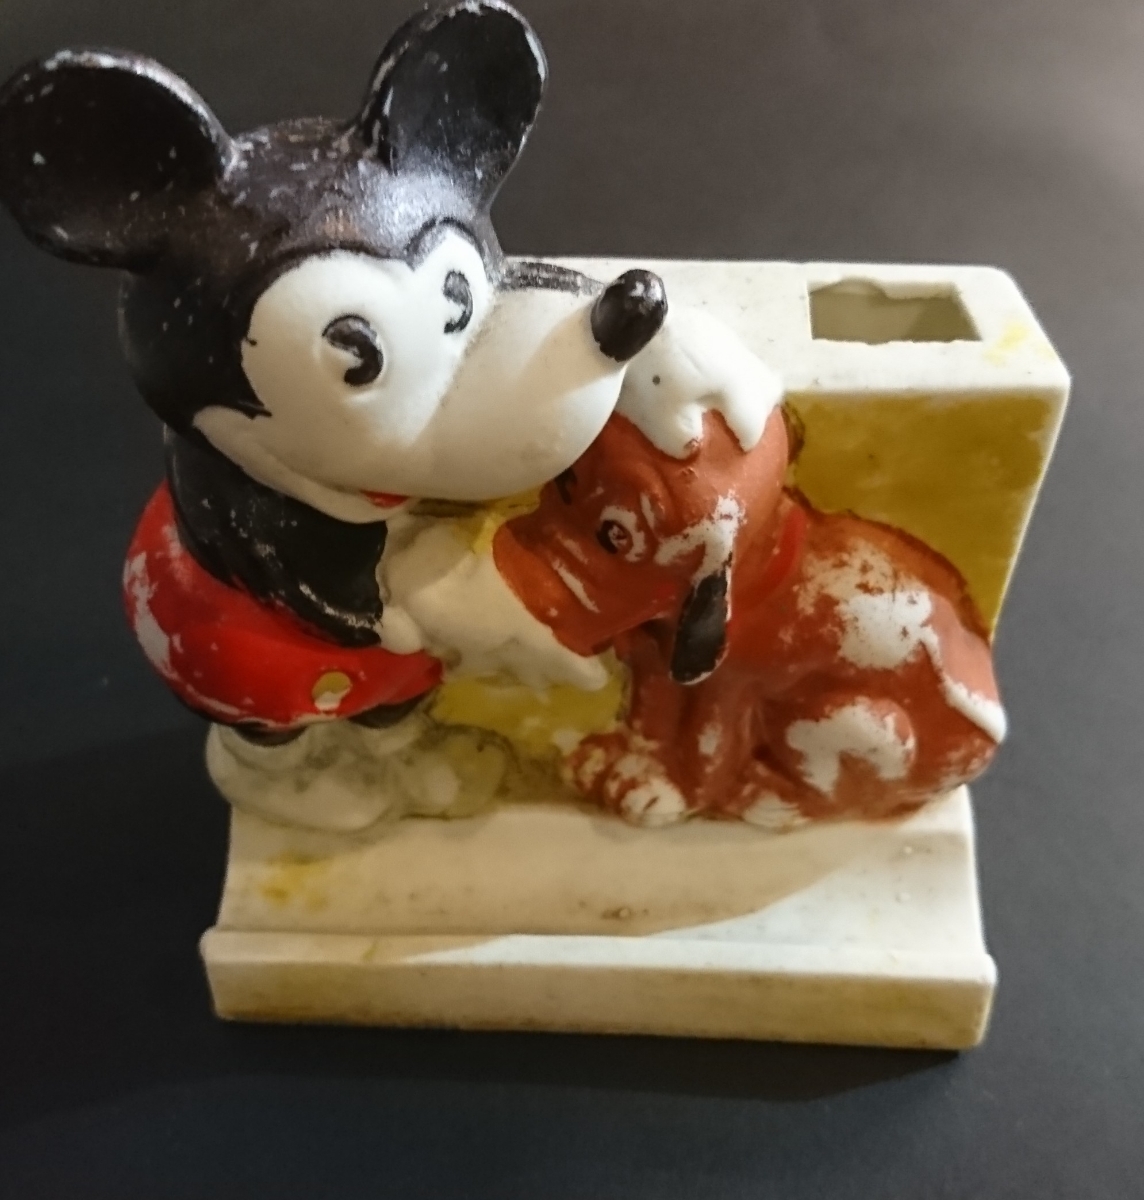 30s 40s vintage mickey mouse pluto ヴィンテージ ミッキーマウス プルート 歯ブラシ立て 陶磁器製